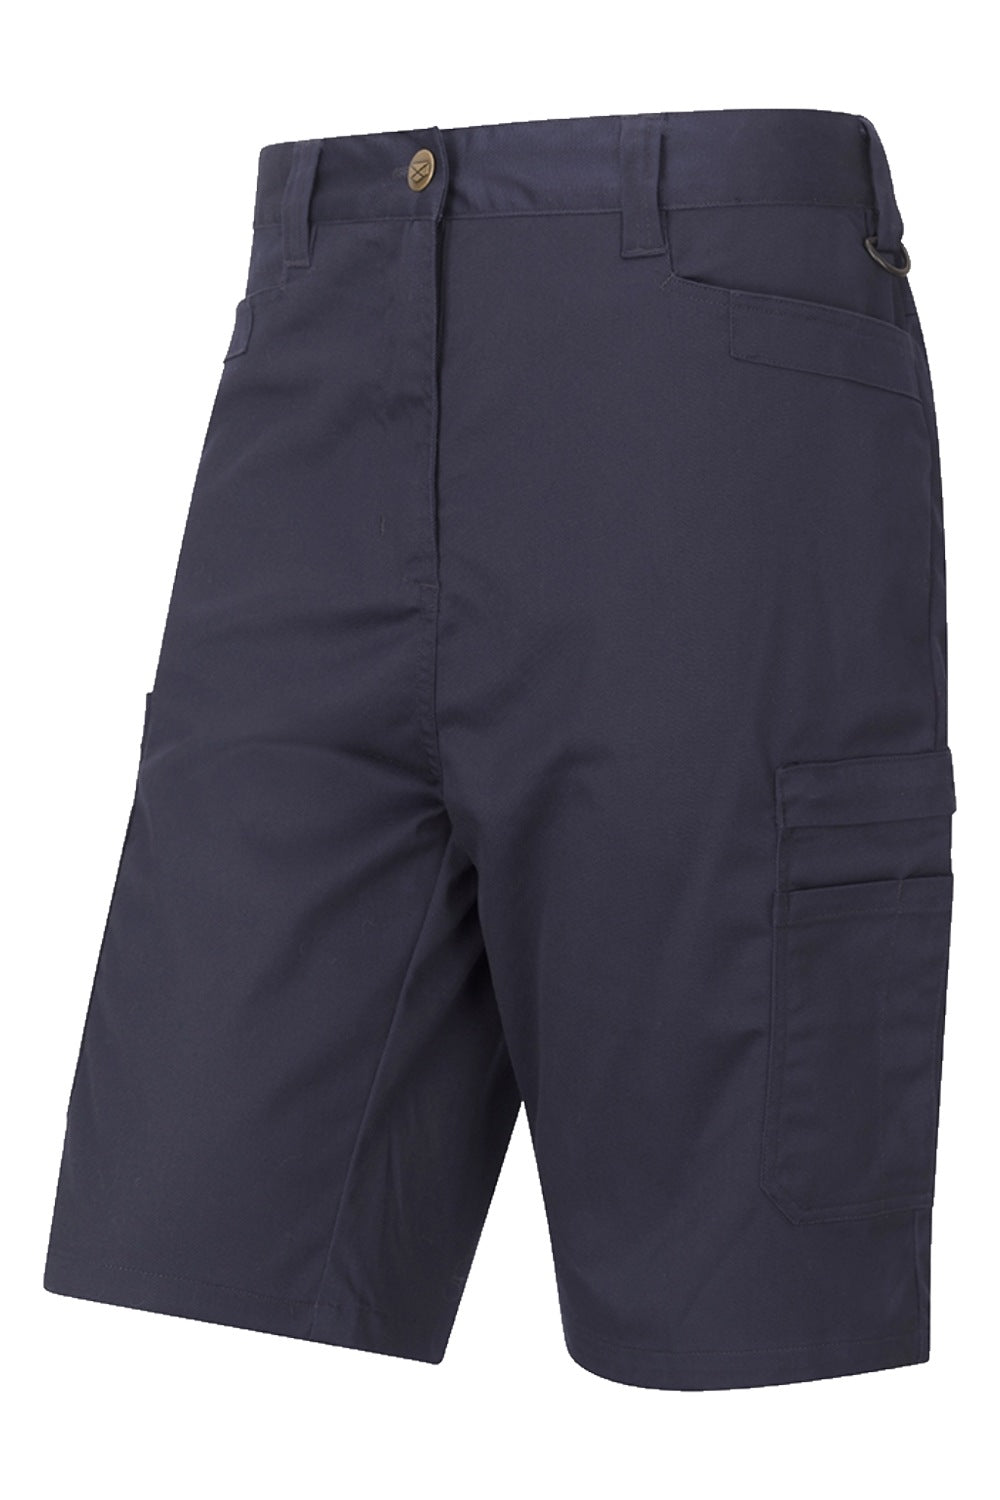 Hoggs Of Fife WorkHogg Utility Shorts in Navy - Front